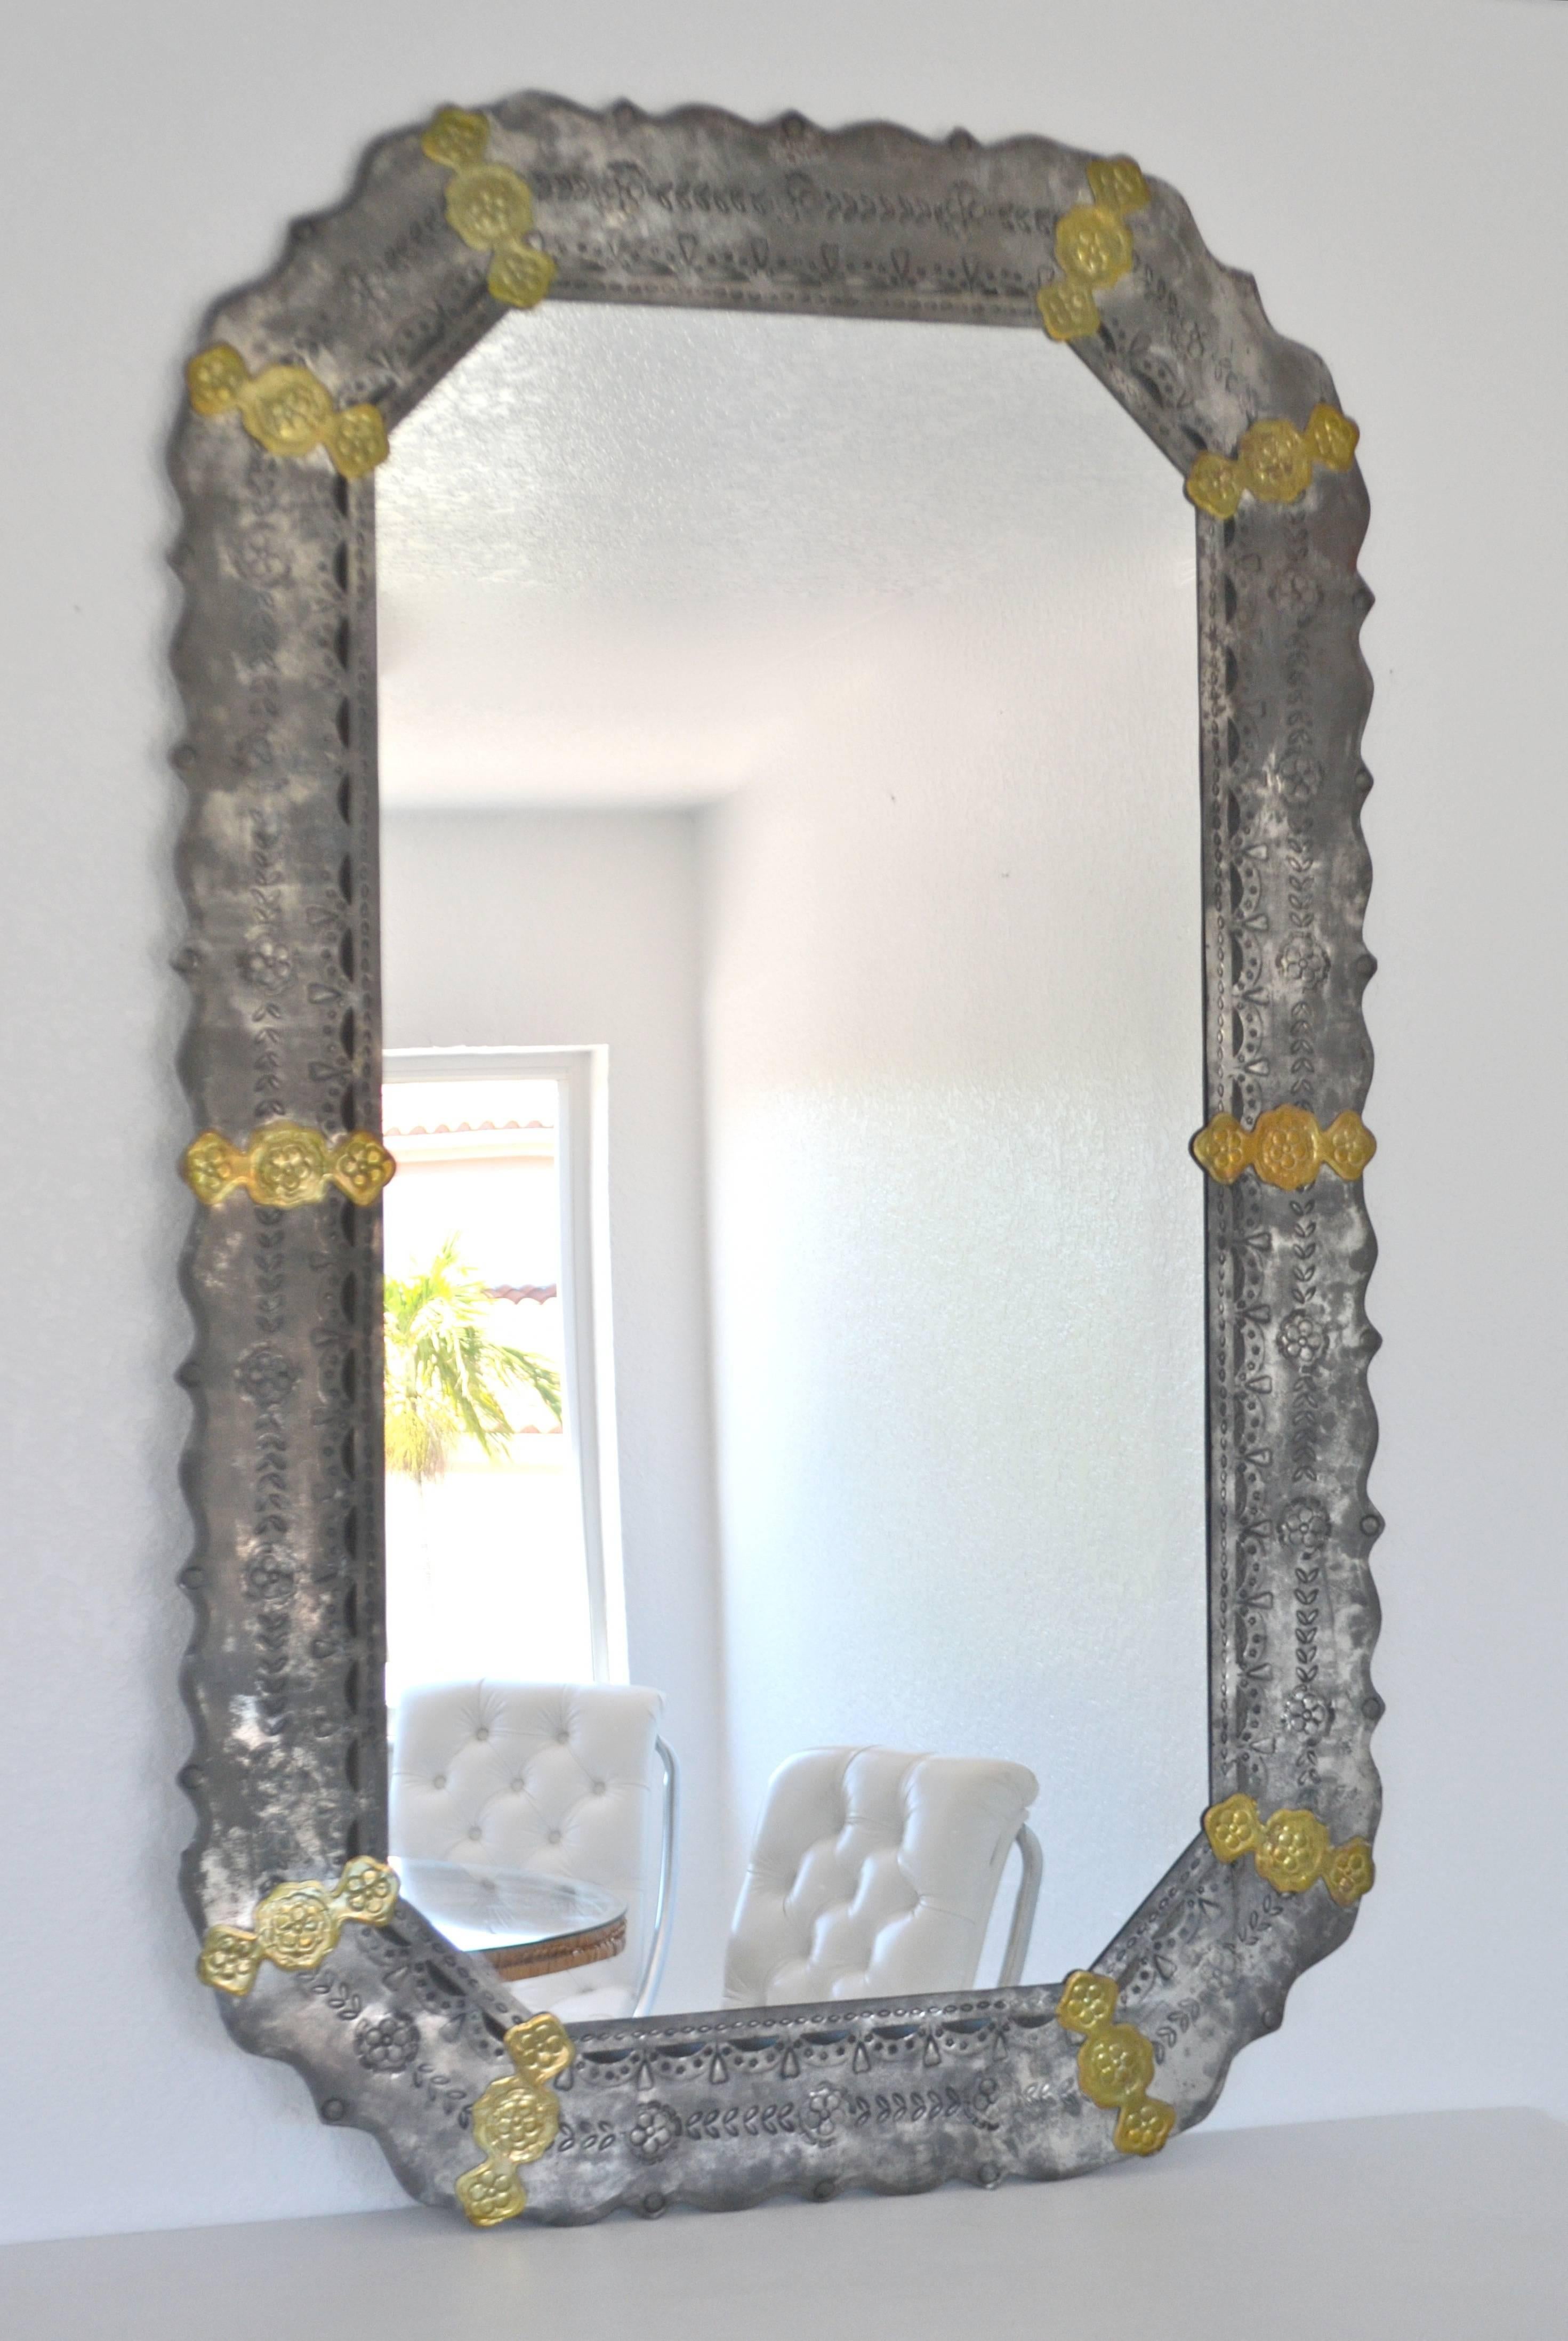 Midcentury Etched Metal Wall Mirror In Good Condition For Sale In West Palm Beach, FL